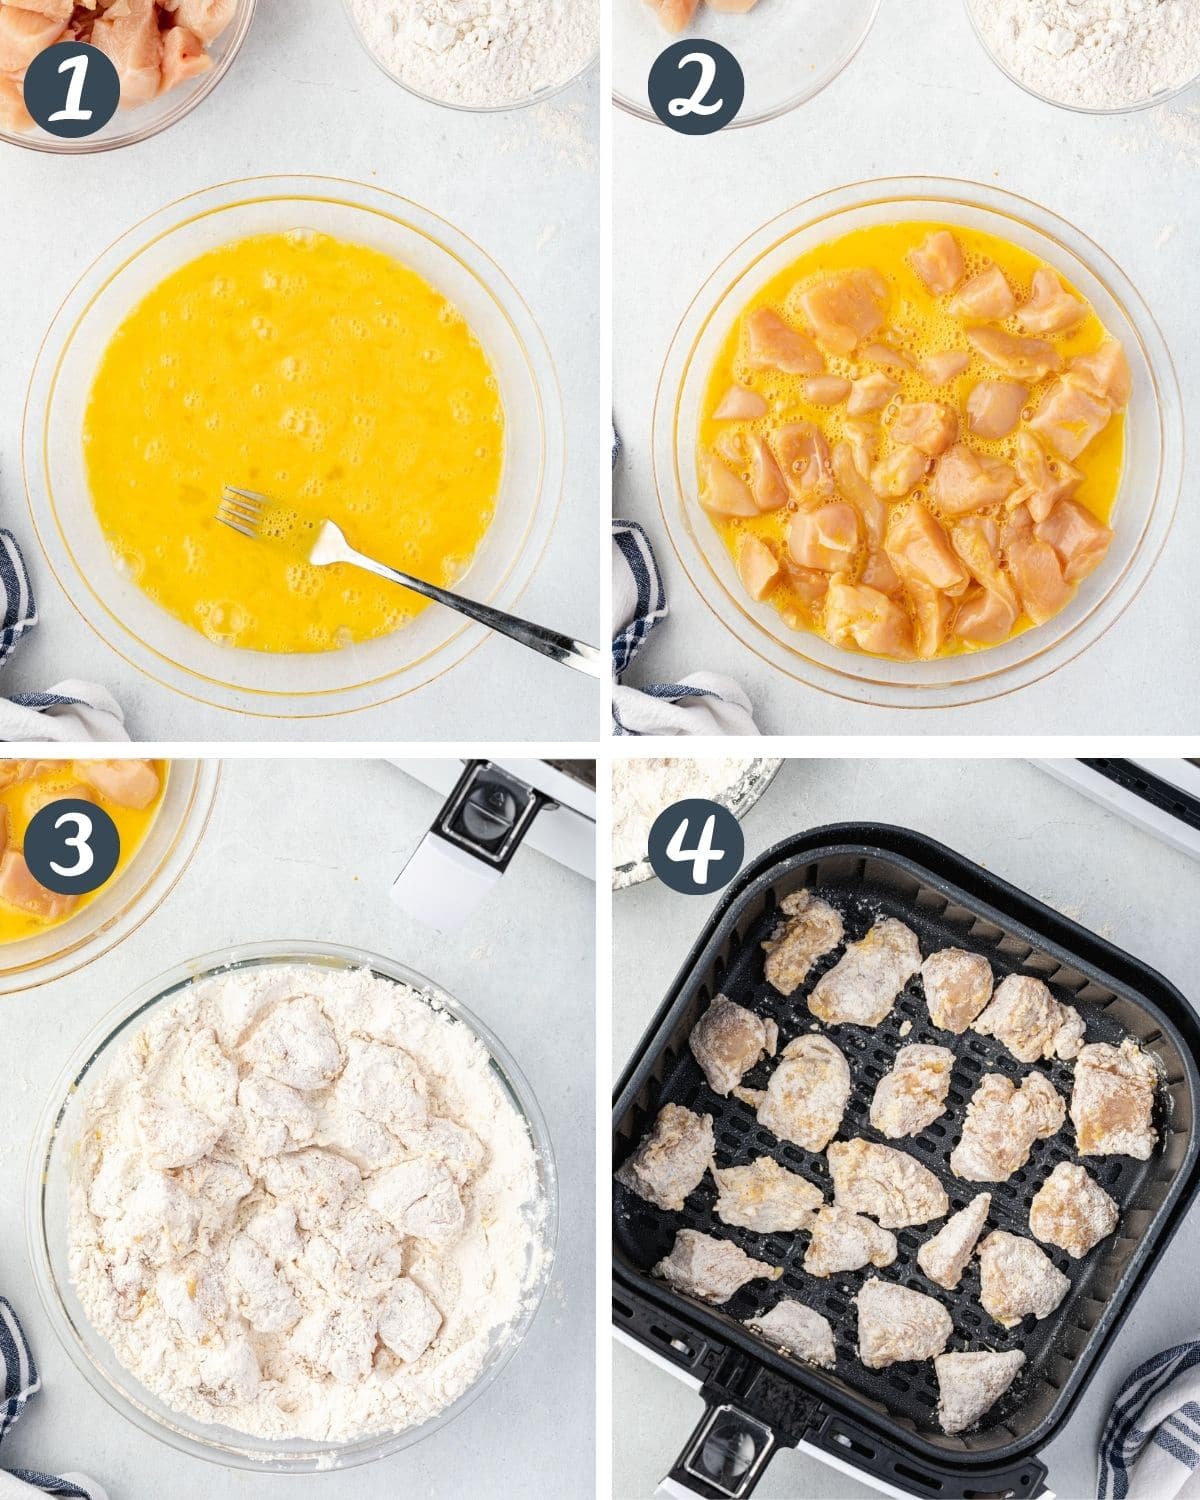 Collage showing steps ot bread the chicken: Egg in shallow bowl, chicken pieces coated in egg, chicken in flour, and pieces in air fryer.